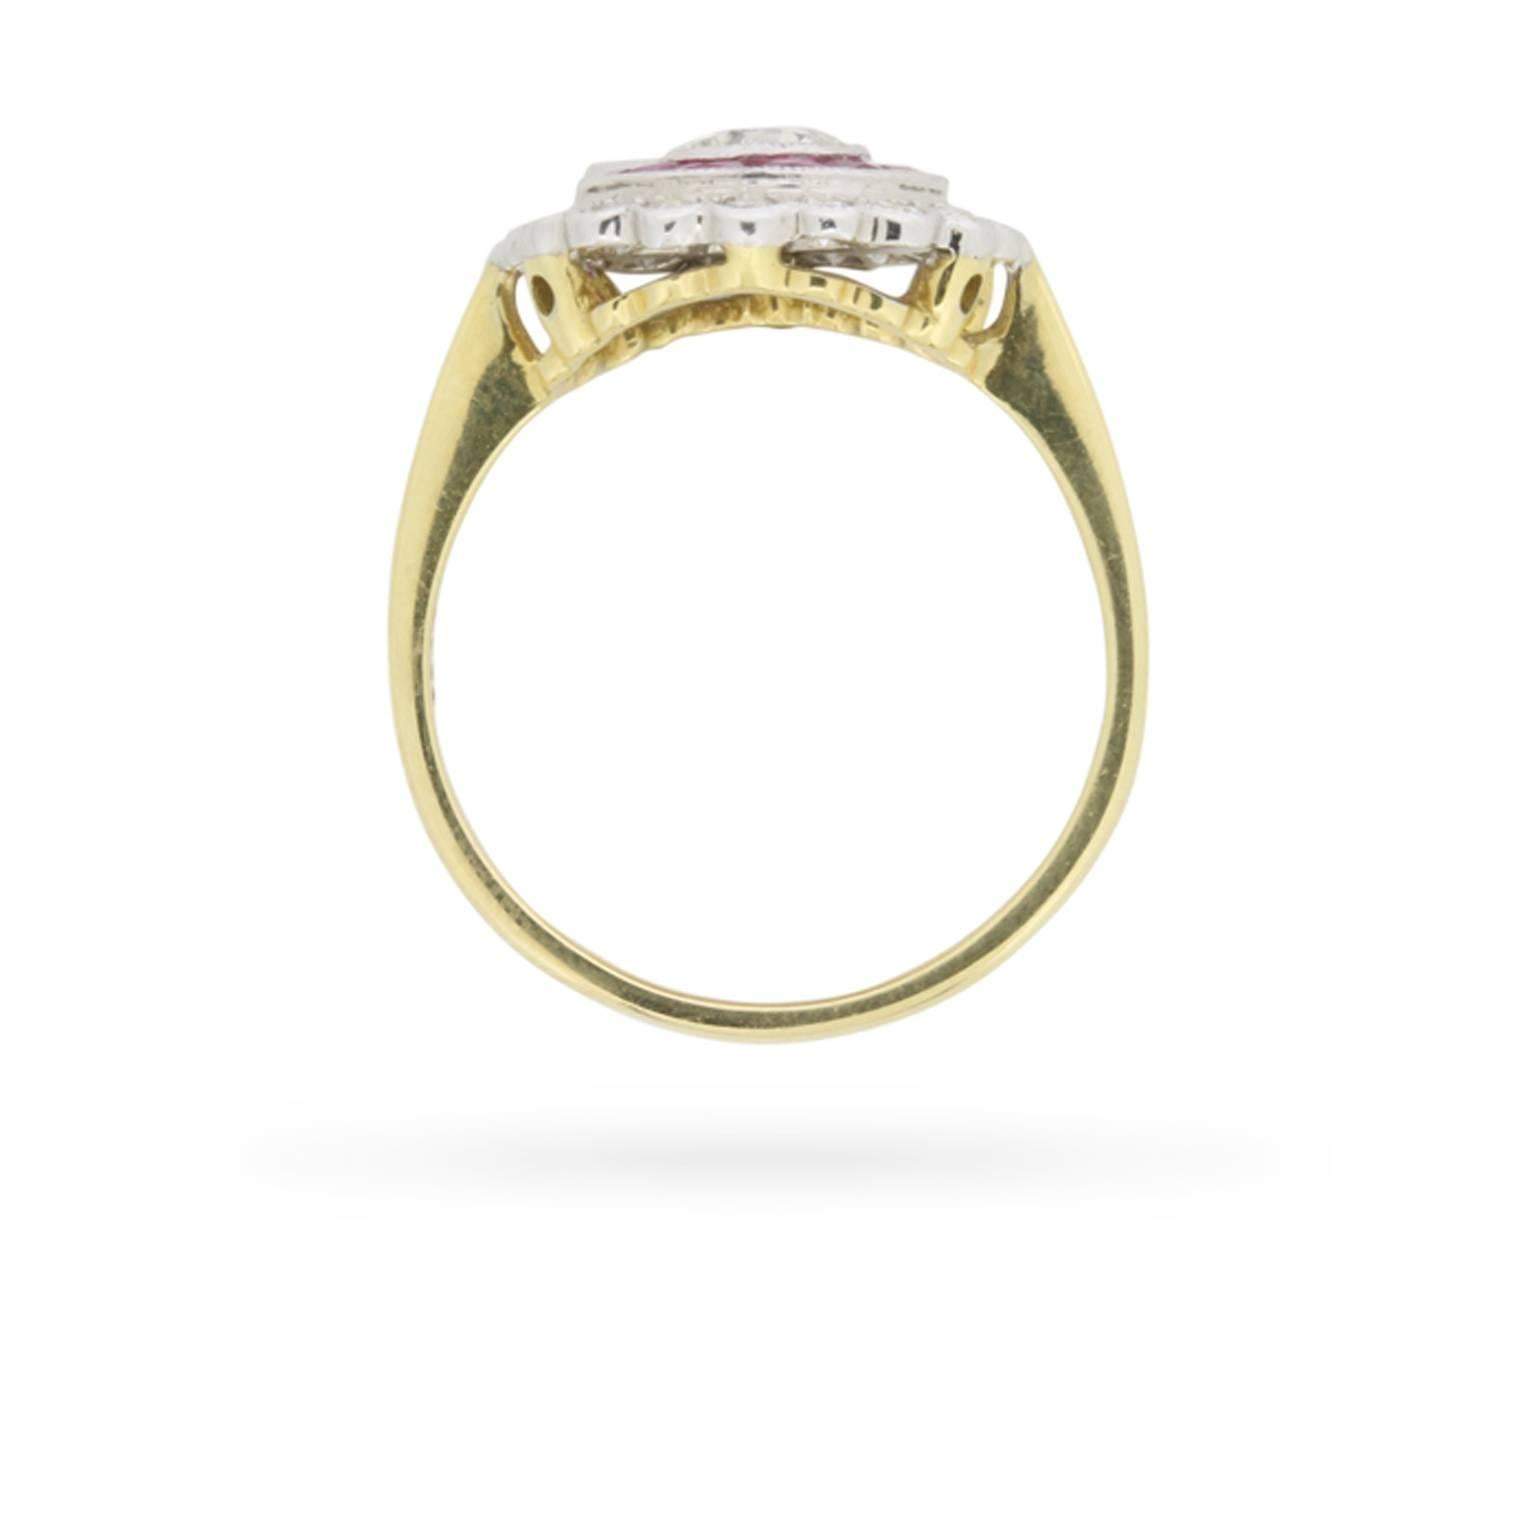 Old and eight cut diamonds, and a beautifully designed, handmade two-tone mounting might lead you to believe that this 1950s era diamond and ruby target ring is much older than its age. The ring’s round old cut diamond ‘bullseye’ is framed